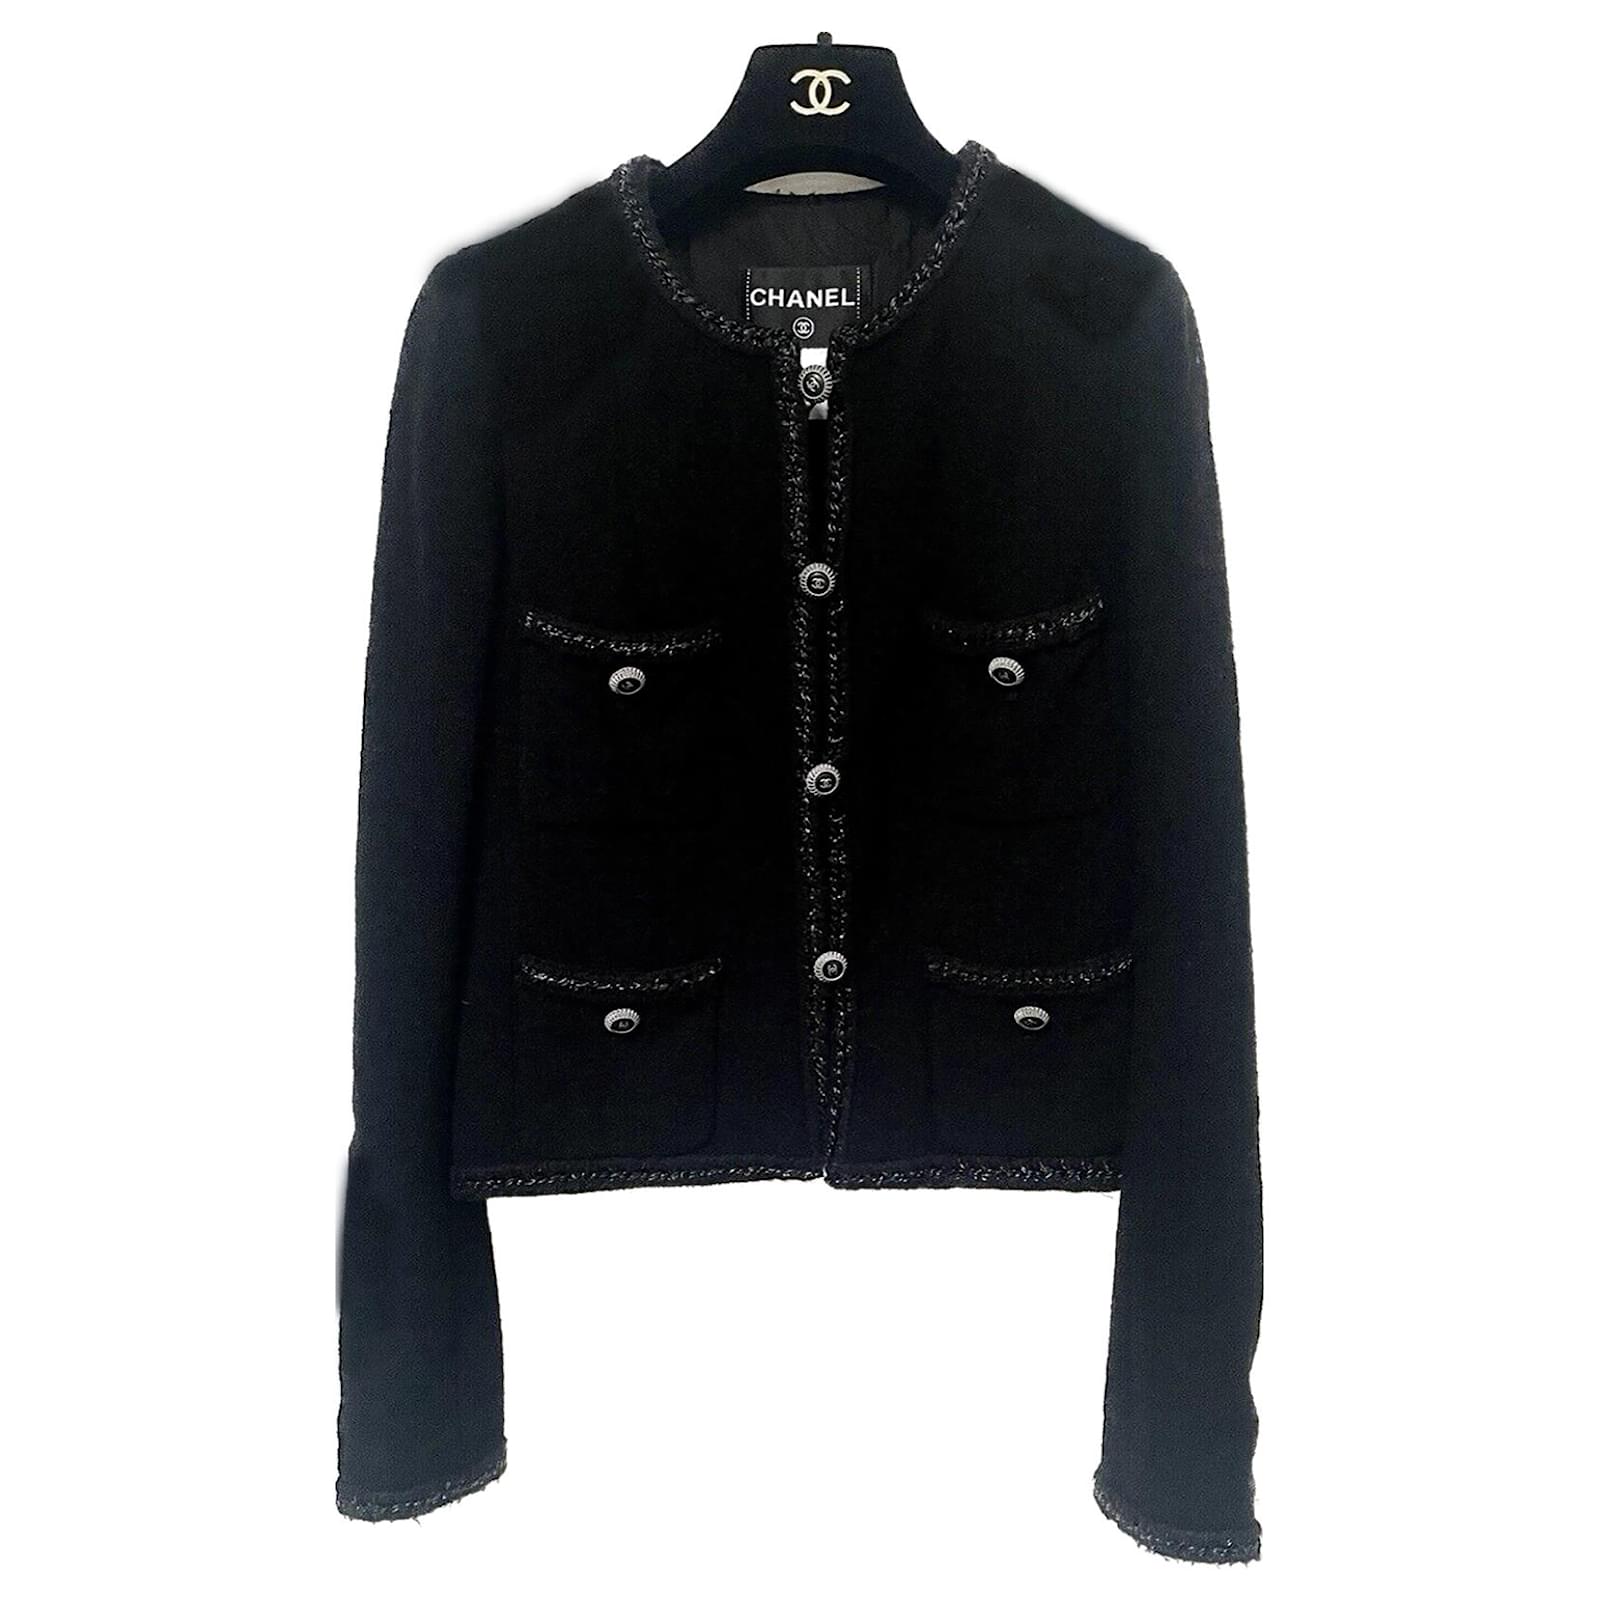 THE LITTLE BLACK JACKET BY CHANEL